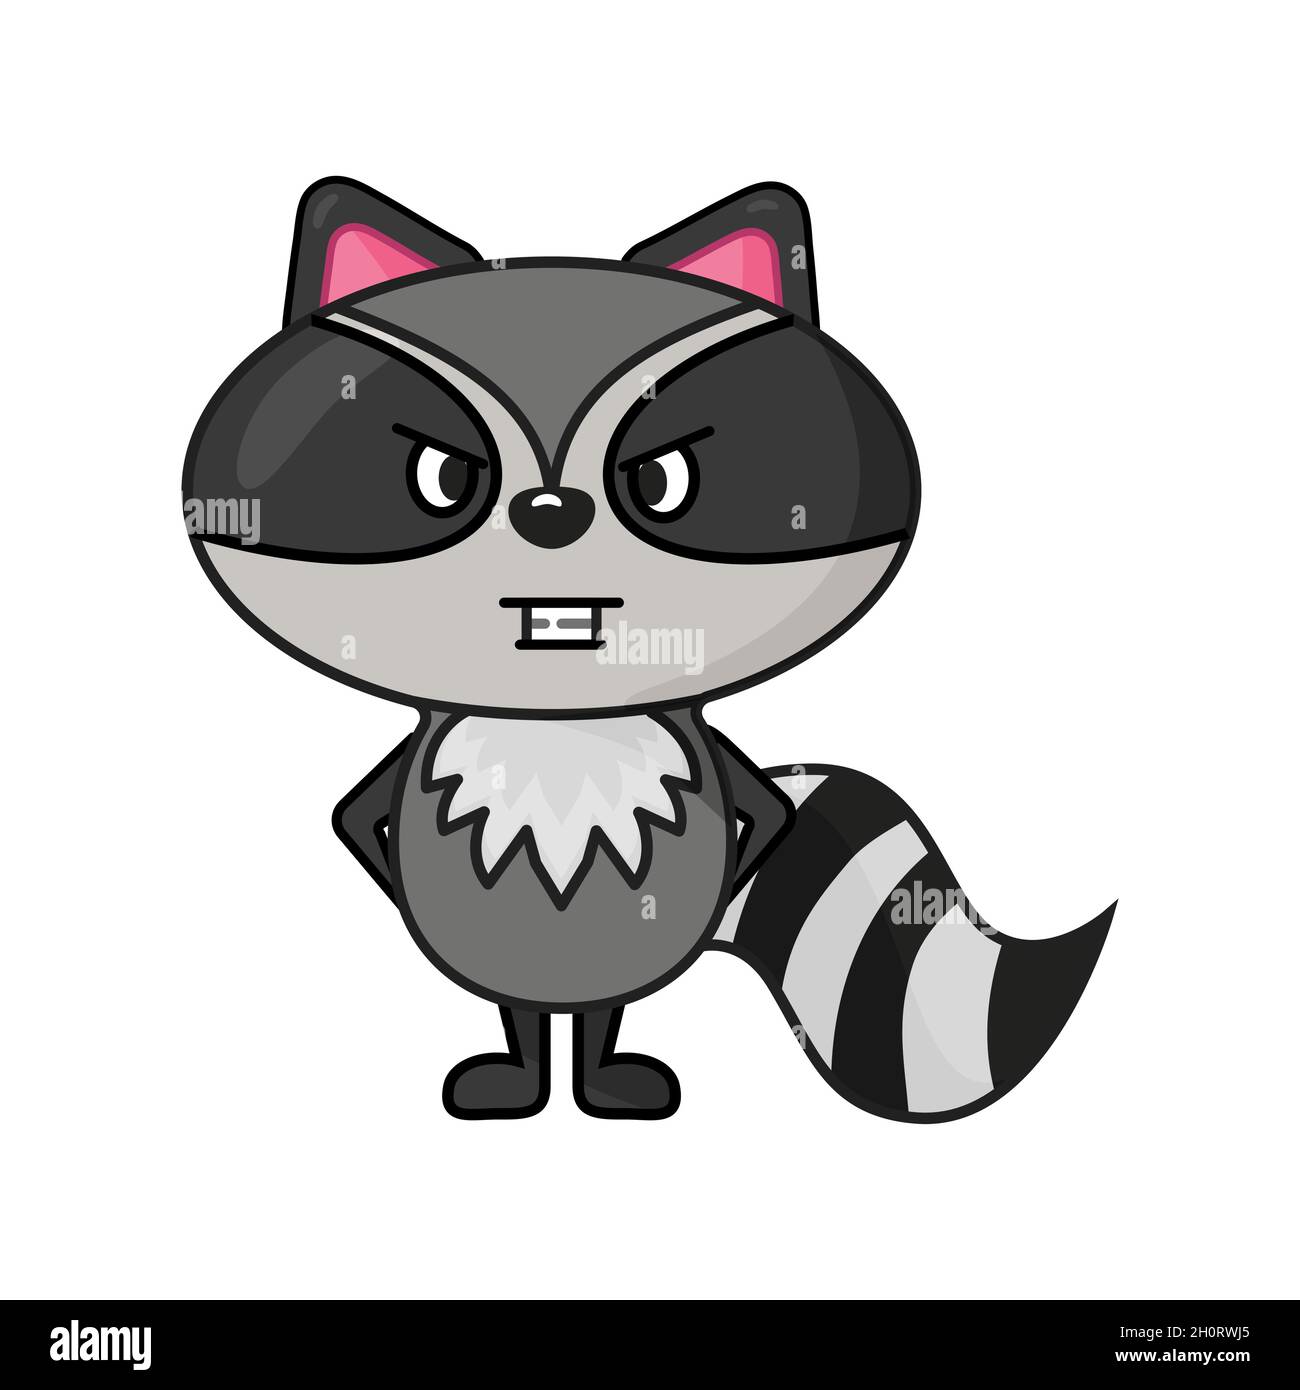 flat style funny angry raccoon character design Stock Vector